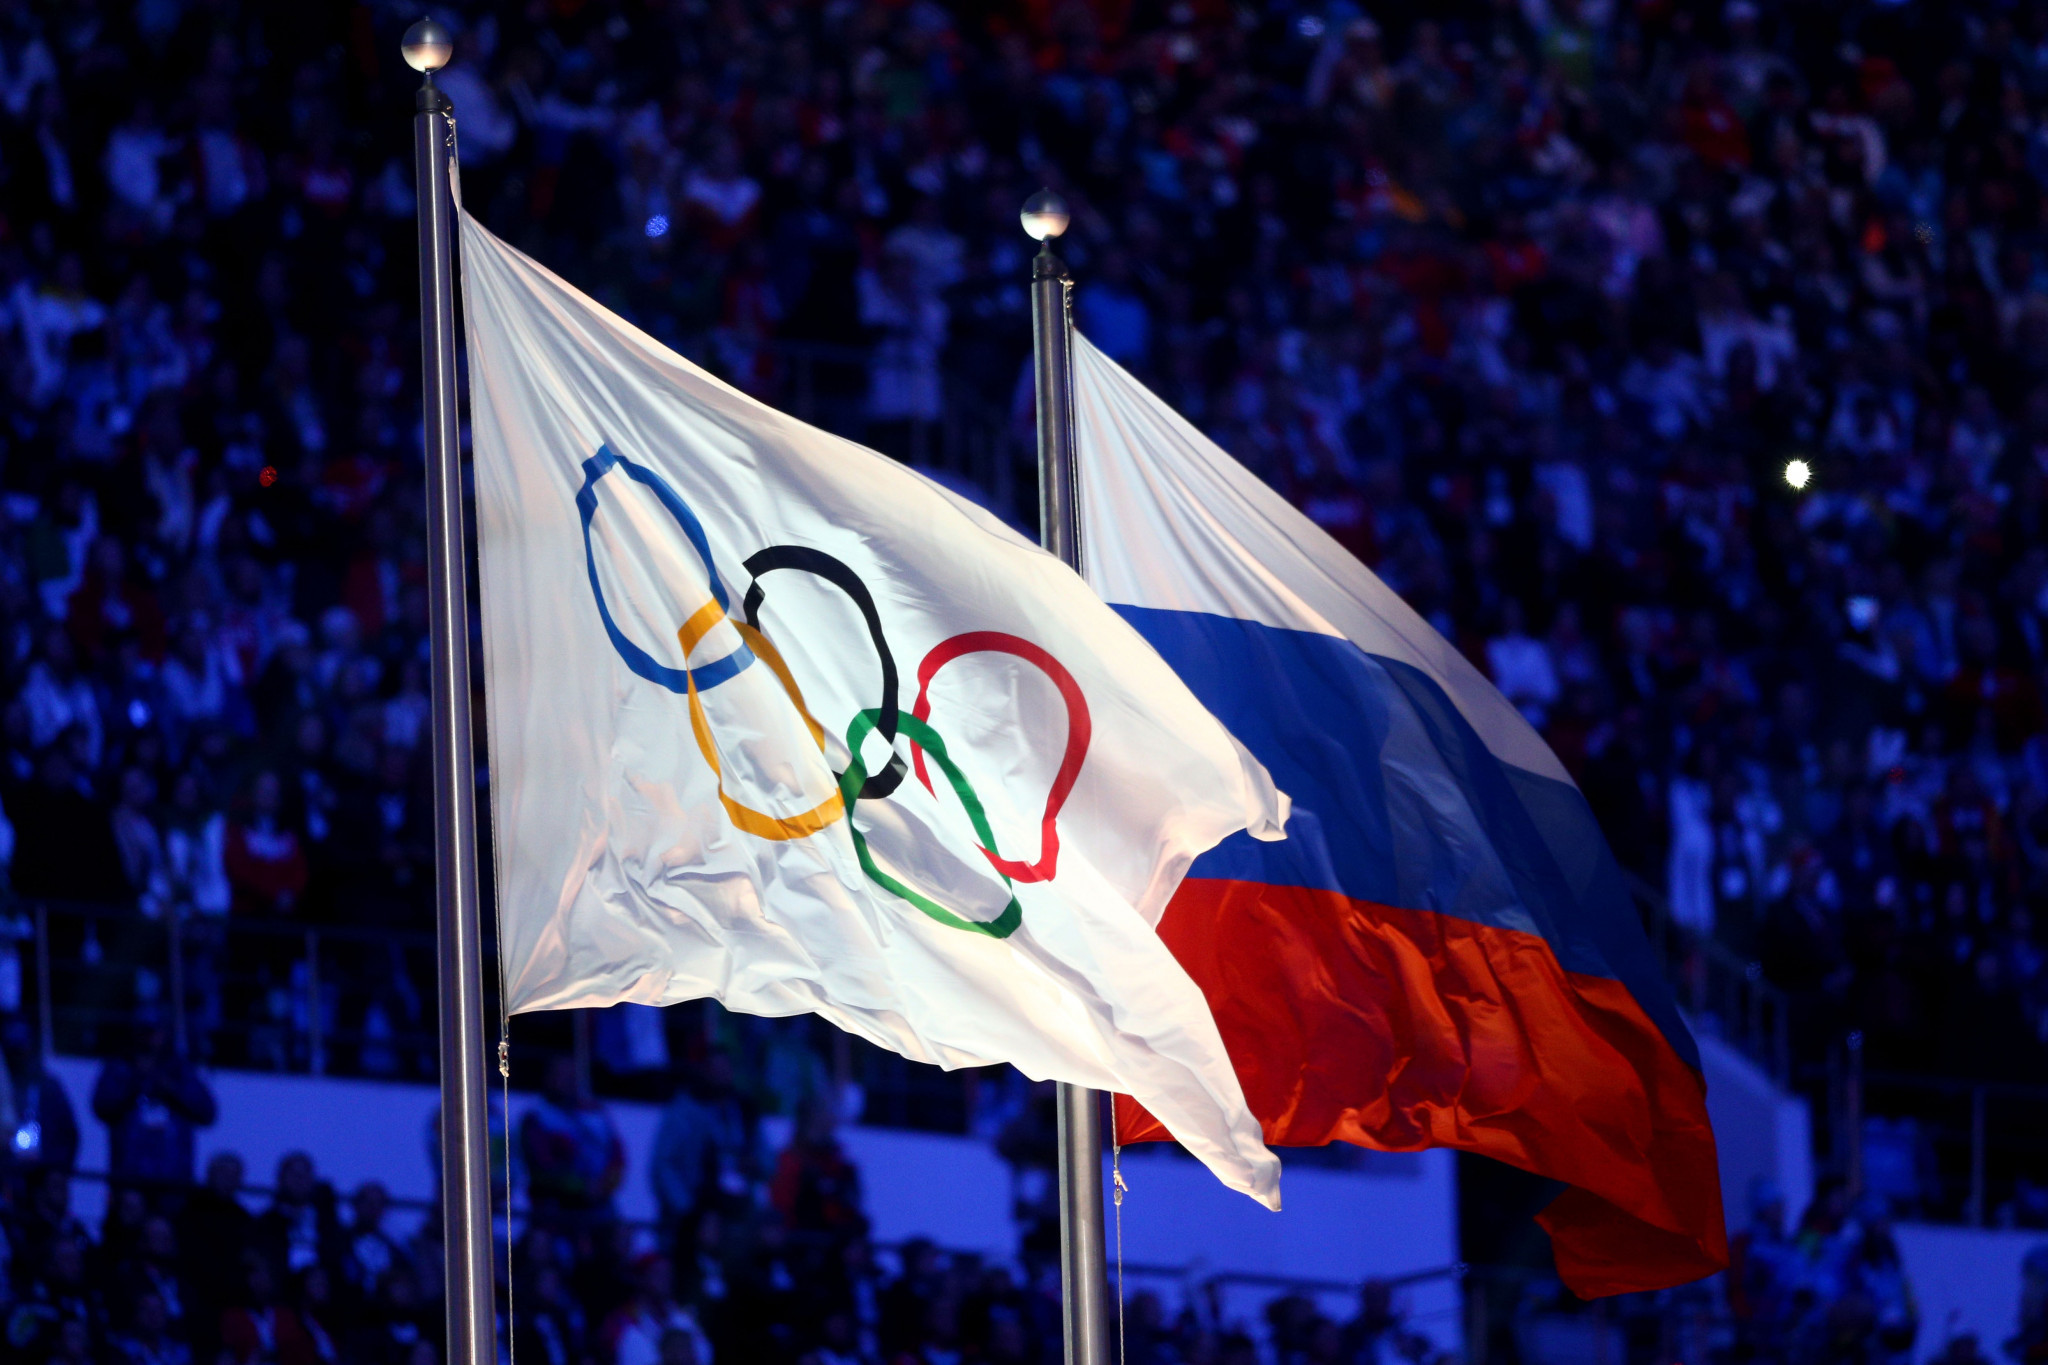 Bach claims IOC received "personal threats" from Russia, relationship has "dramatically deteriorated"